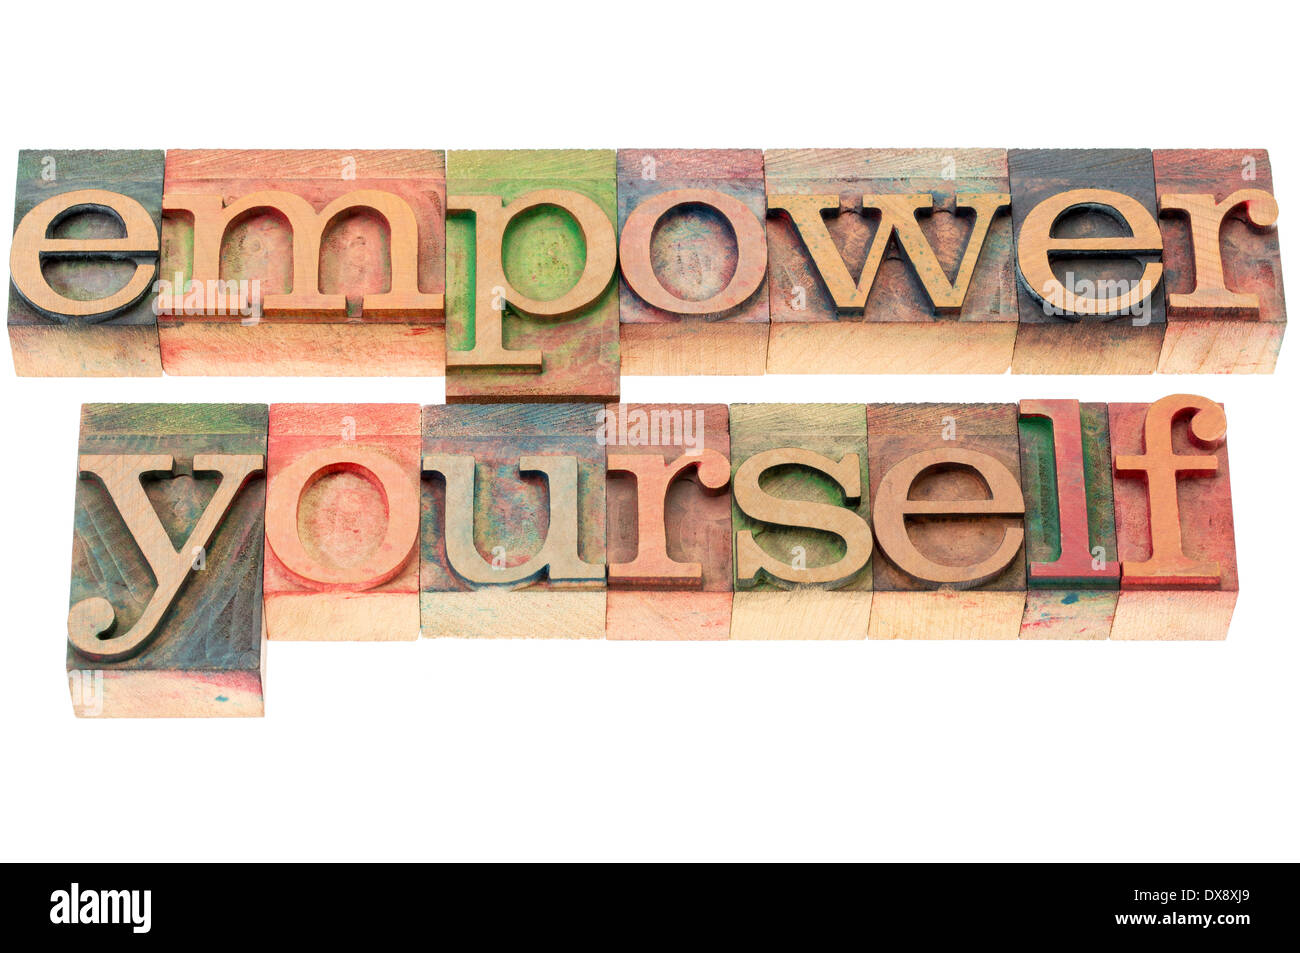 empower yourself - isolated text in letterpress wood type Stock Photo